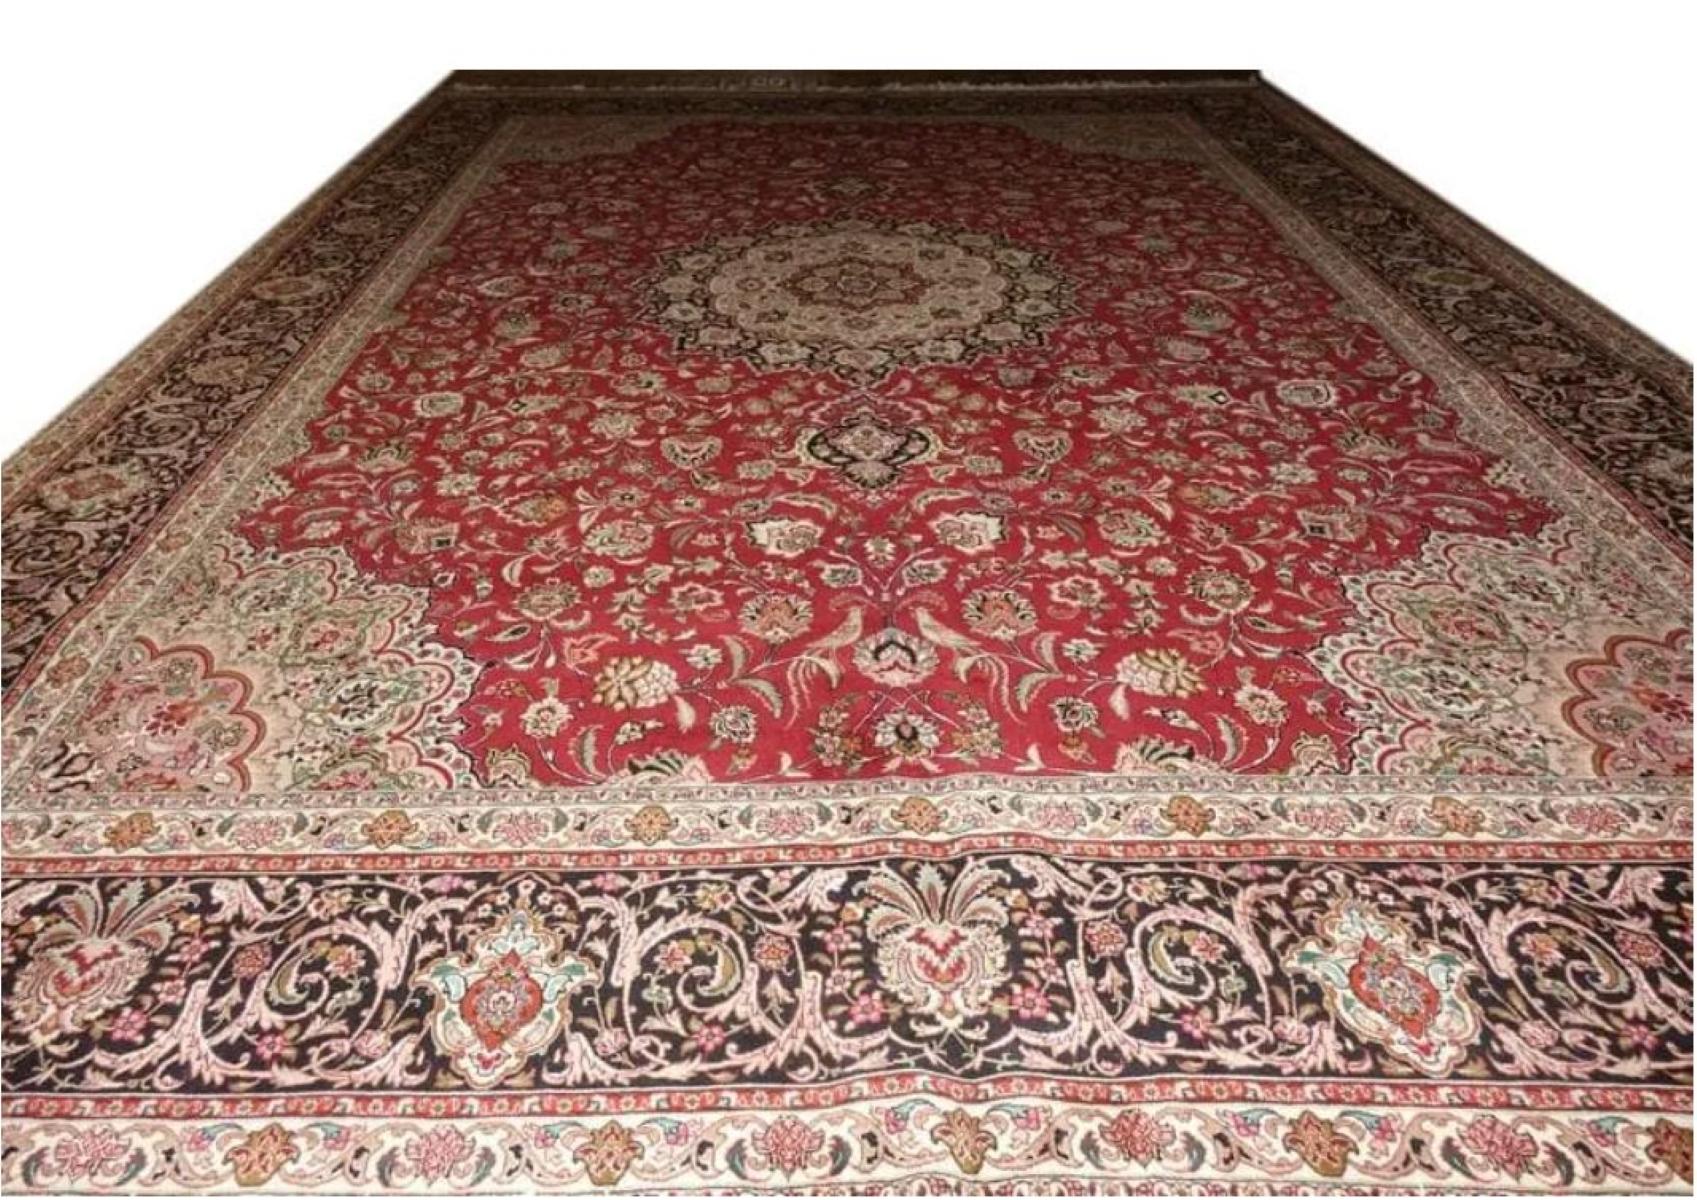 Very fine Persian Rug Tabriz 400 Knots per inch, Size 10 x 13.3  Iran Tabriz  Wool and Silk. Around 7,500,000 knots tied by hand one by one. It takes 4 years to complete this piece of art.